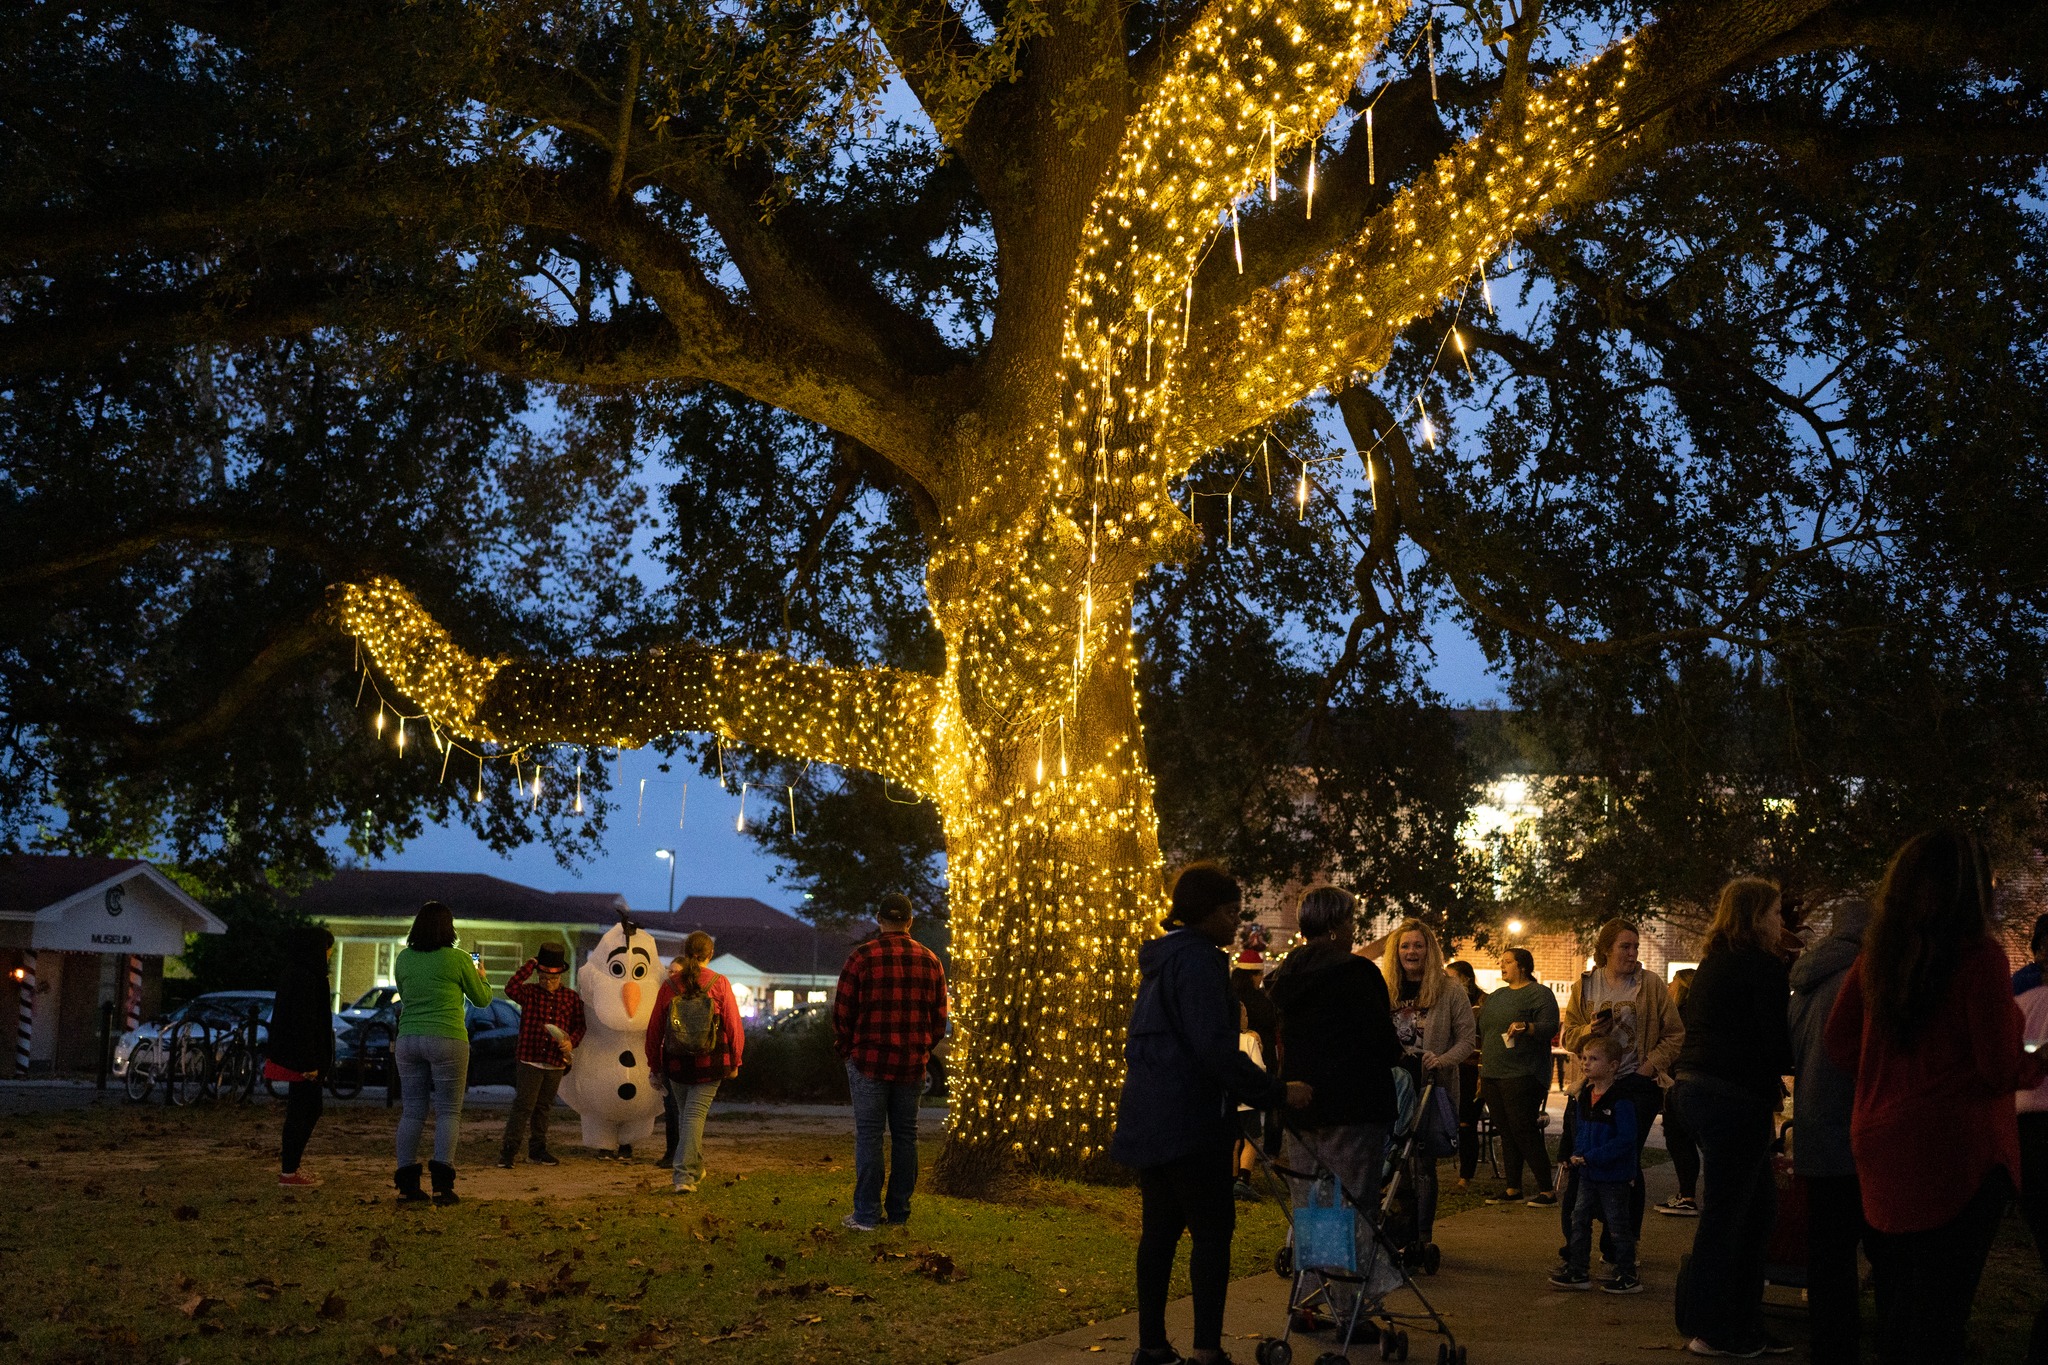 People talking in groups and visiting with Olaf from Frozen under an oak tree with lights on it